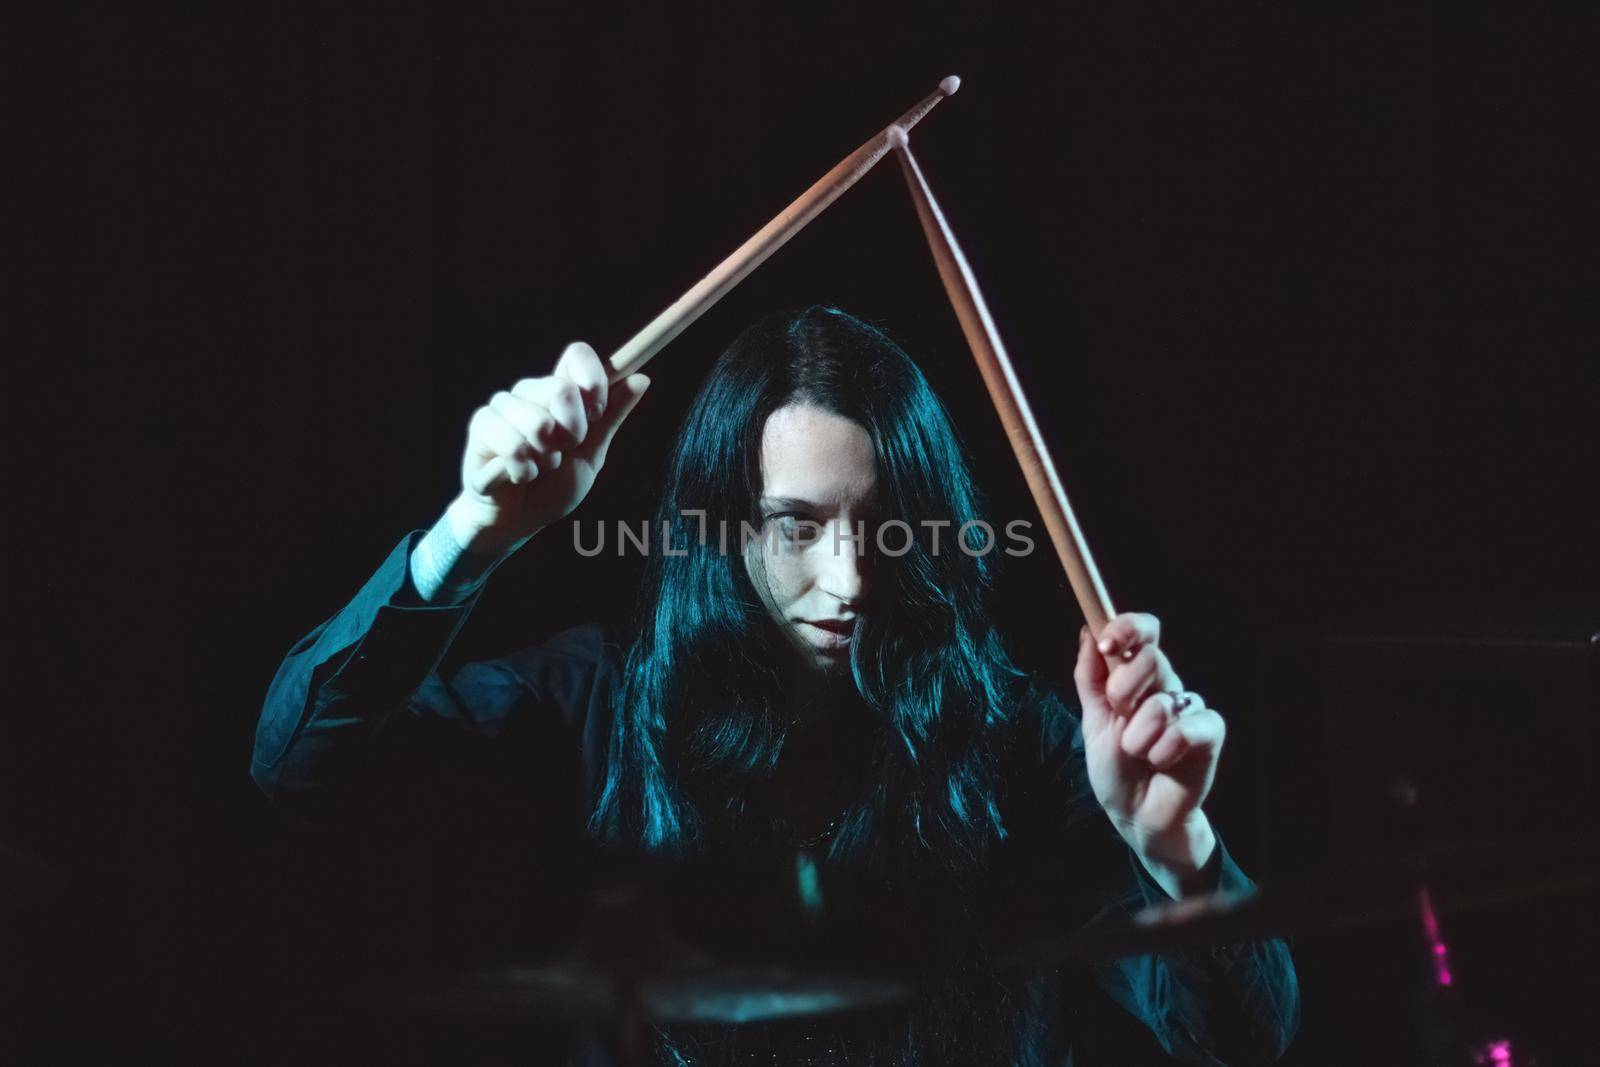 A female metal drummer with long hair holding up drumsticks behind the drumkit against a dark background by tennesseewitney